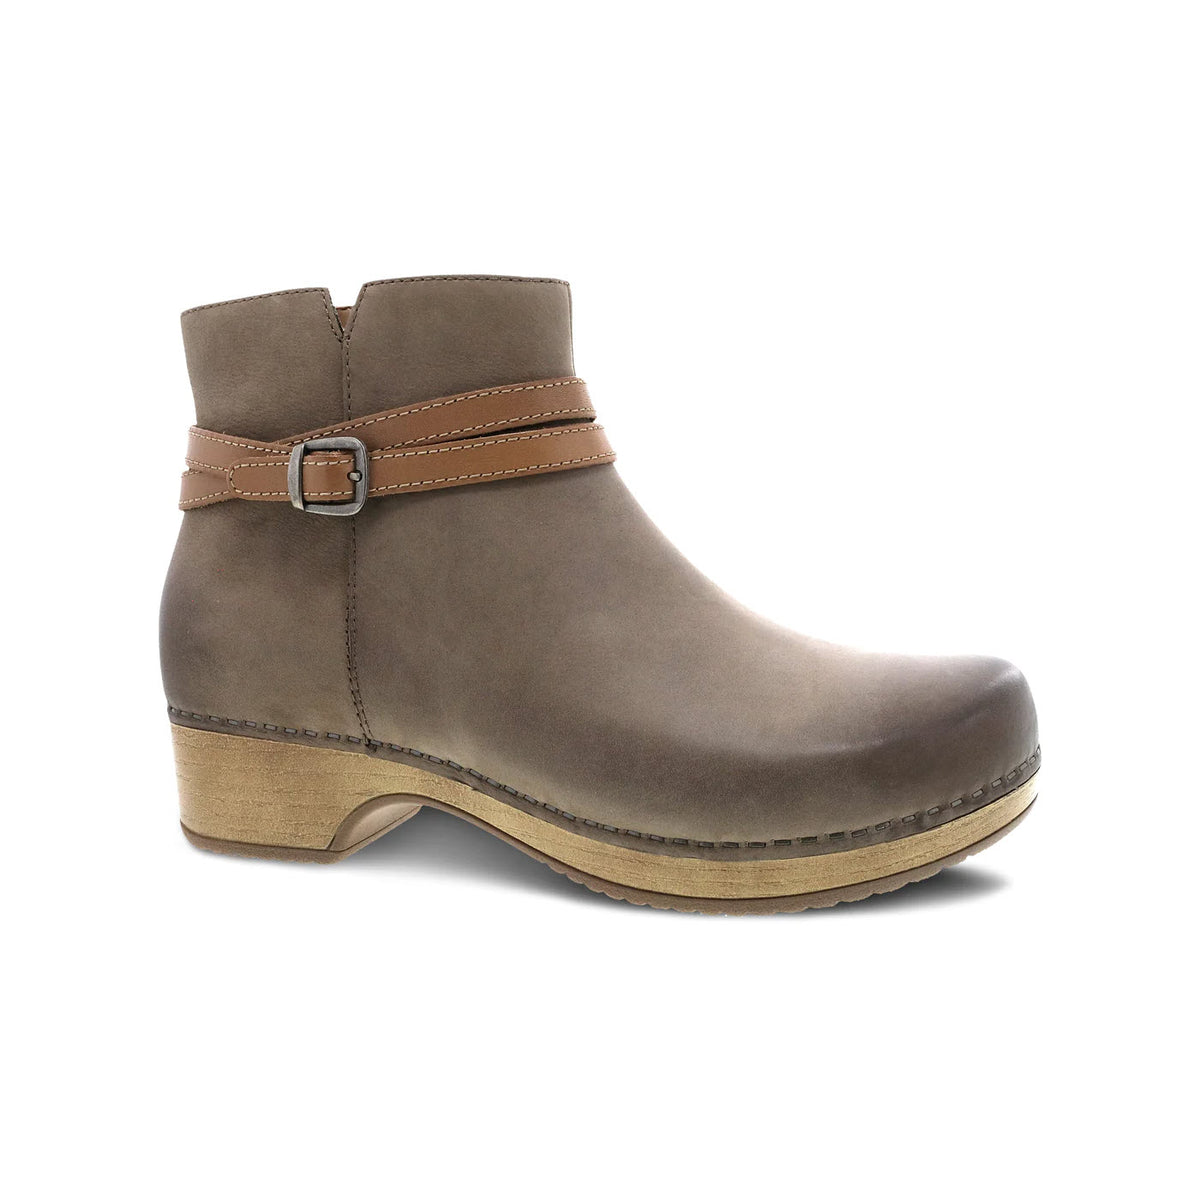 A single Dansko Brook Taupe Burnished ankle bootie with a buckled strap and wooden block heel, isolated on a white background.